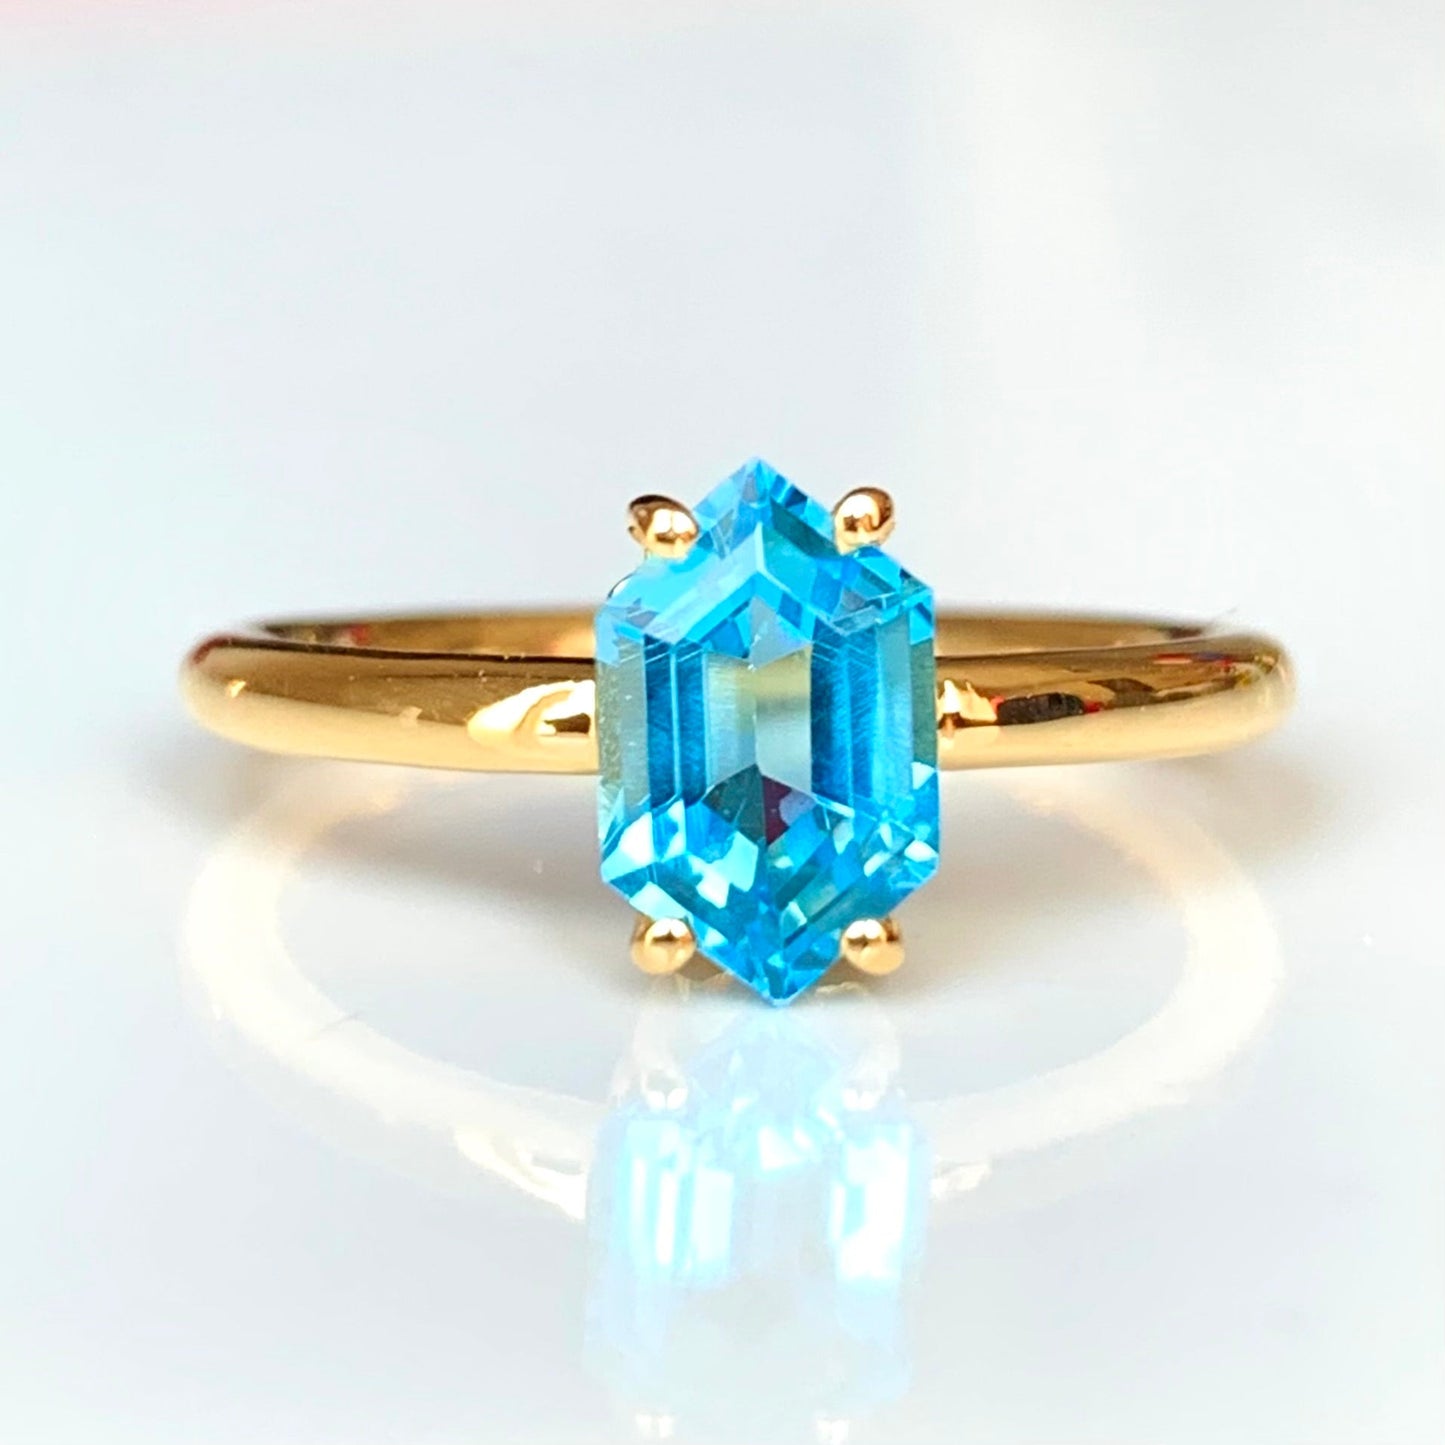 BLUE TOPAZ HEXAGON SOLITAIRE RING - Fool's Gold Jewellery